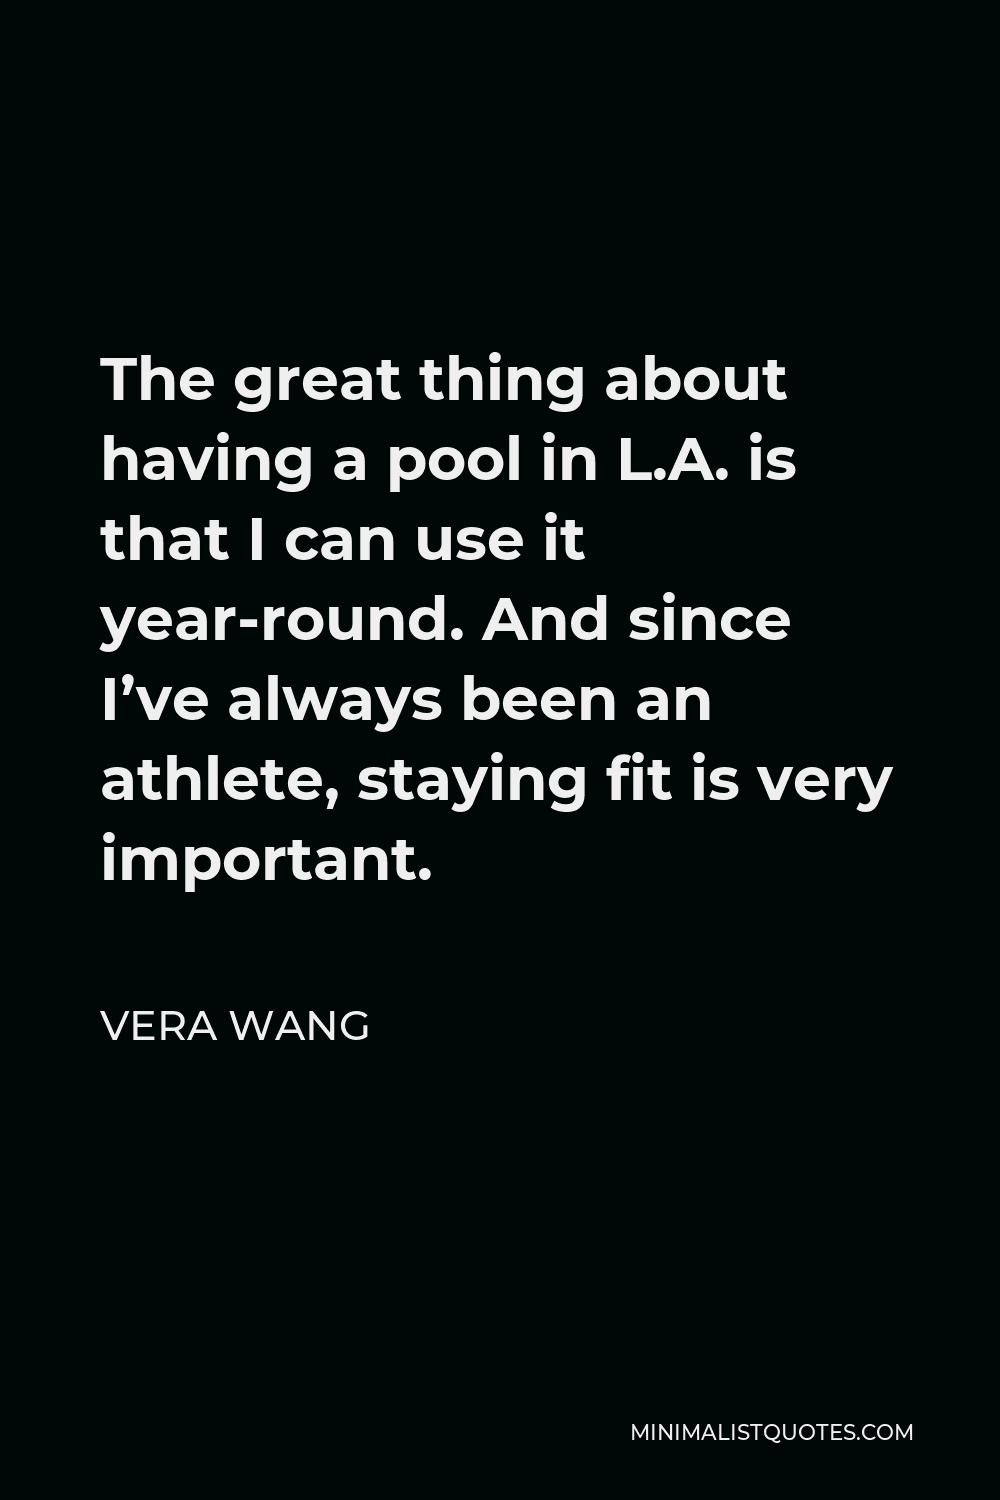 Vera Wang Quote - The great thing about having a pool in L.A. is that I can use it year-round. And since I’ve always been an athlete, staying fit is very important.